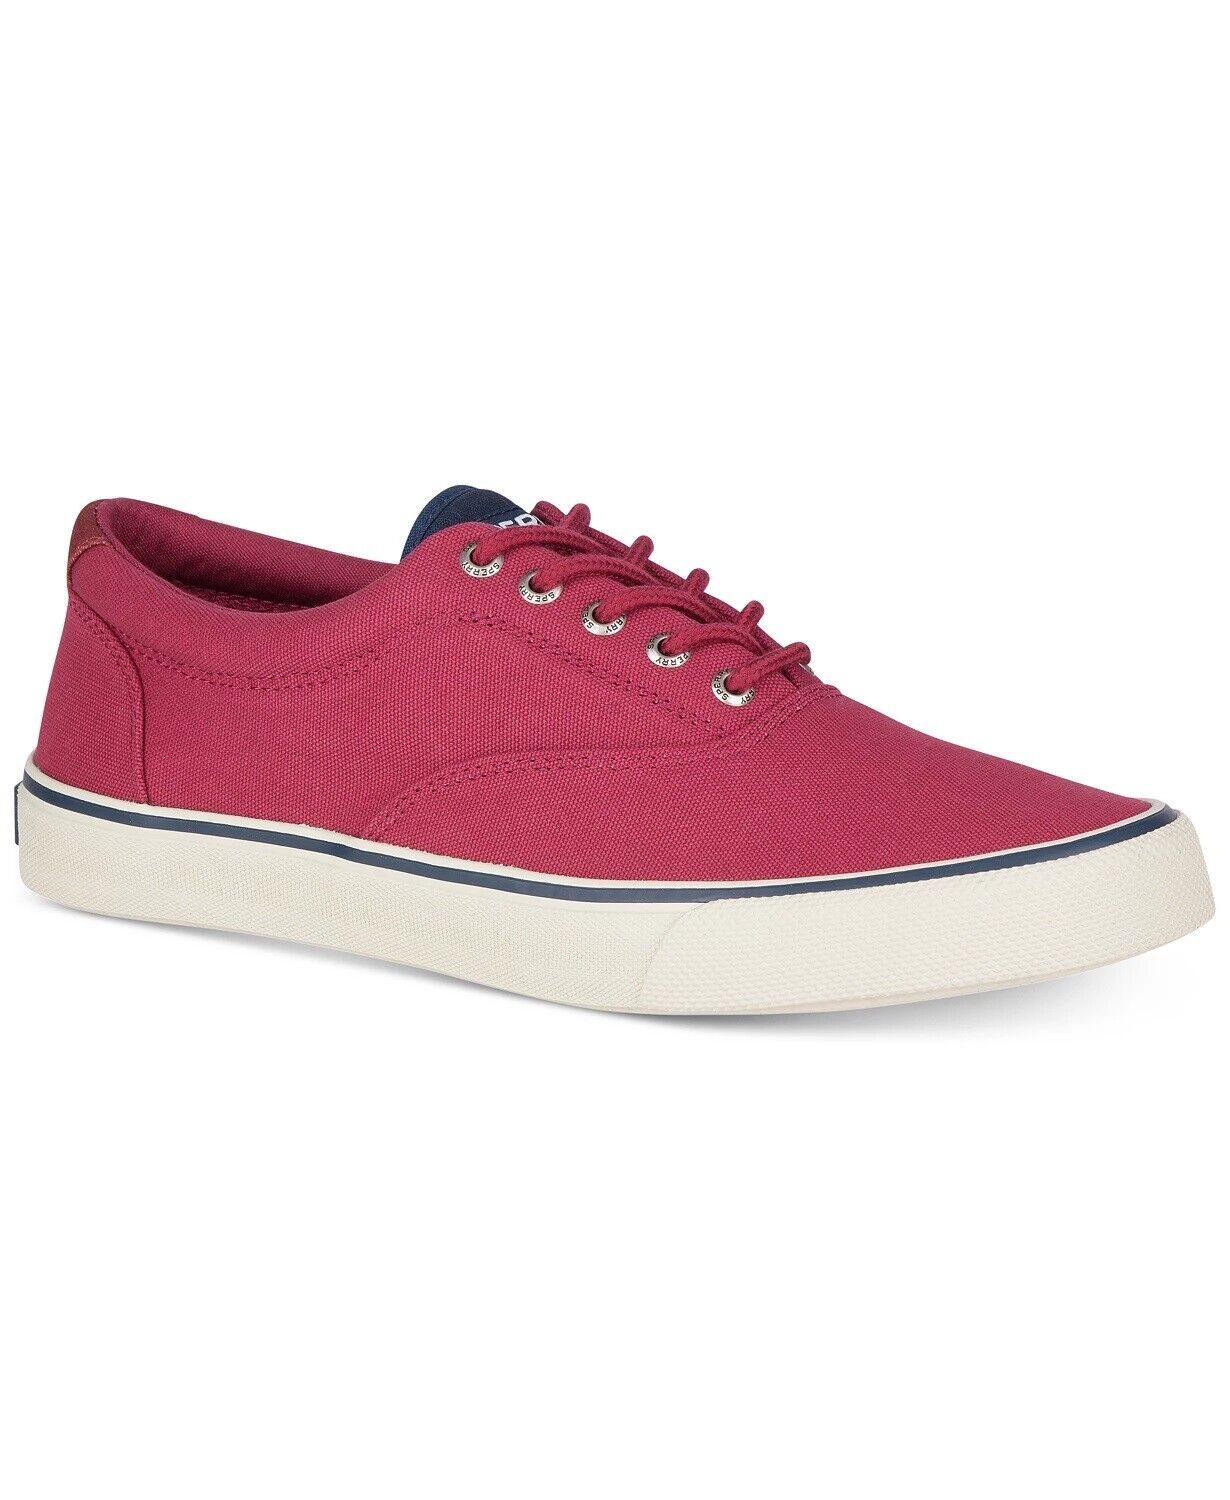 Sperry Top Sider Men Striper II CVO Burgundy Casual Lace Up Sneakers - $24.33